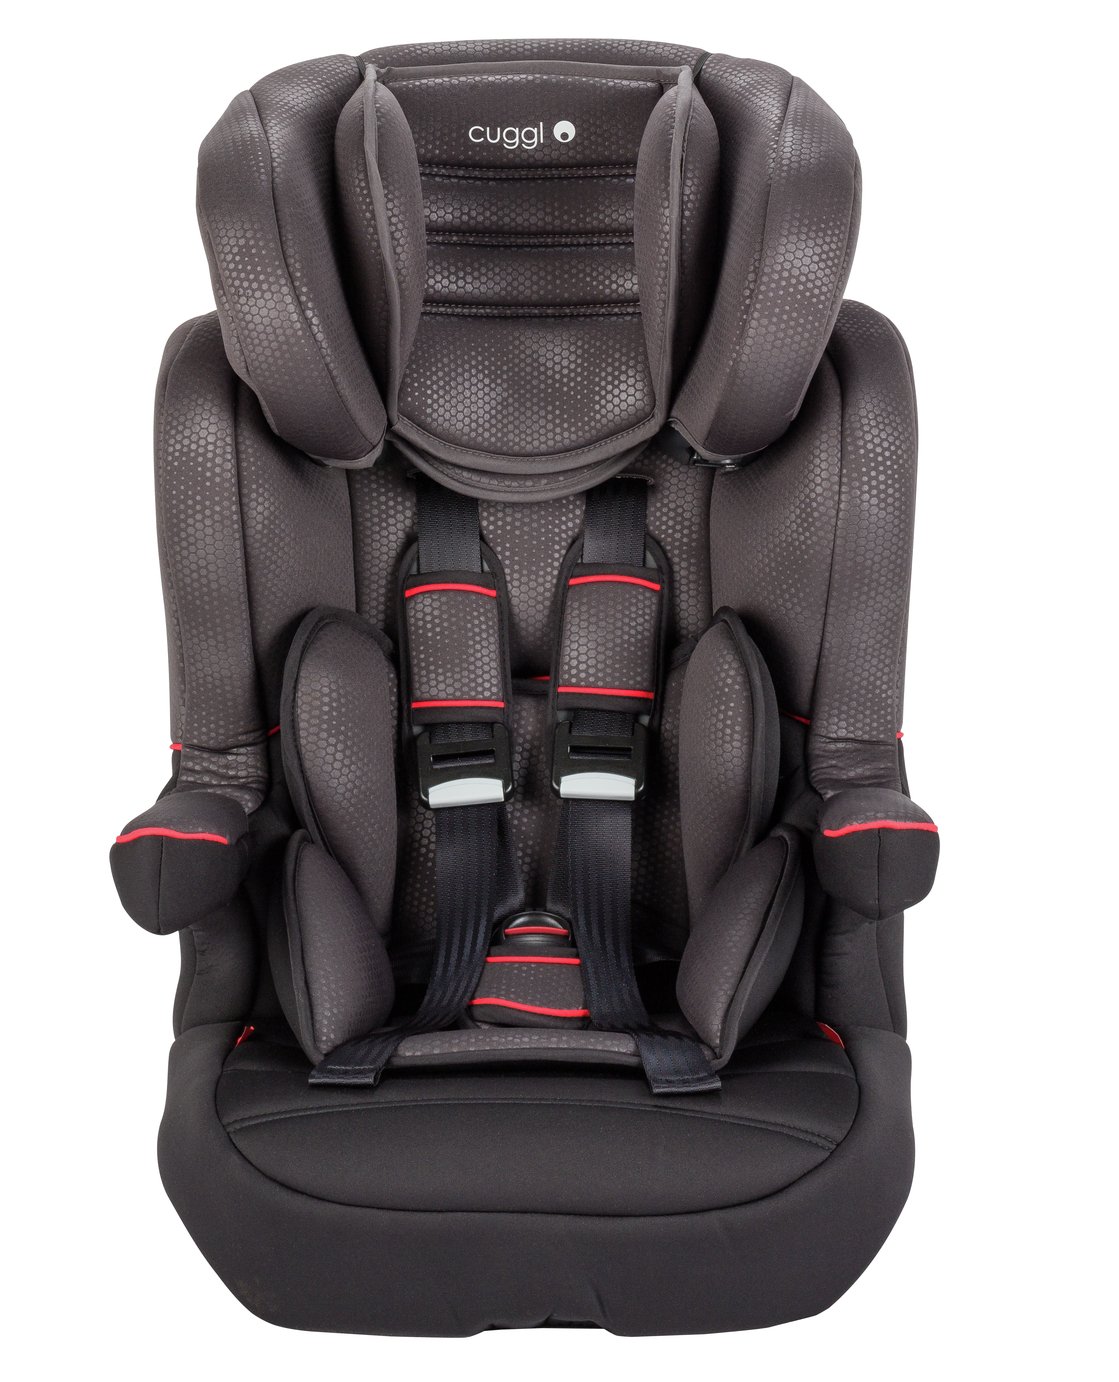 Cuggl Linnet Group 1/2/3 ISOFIX Car Seat Review